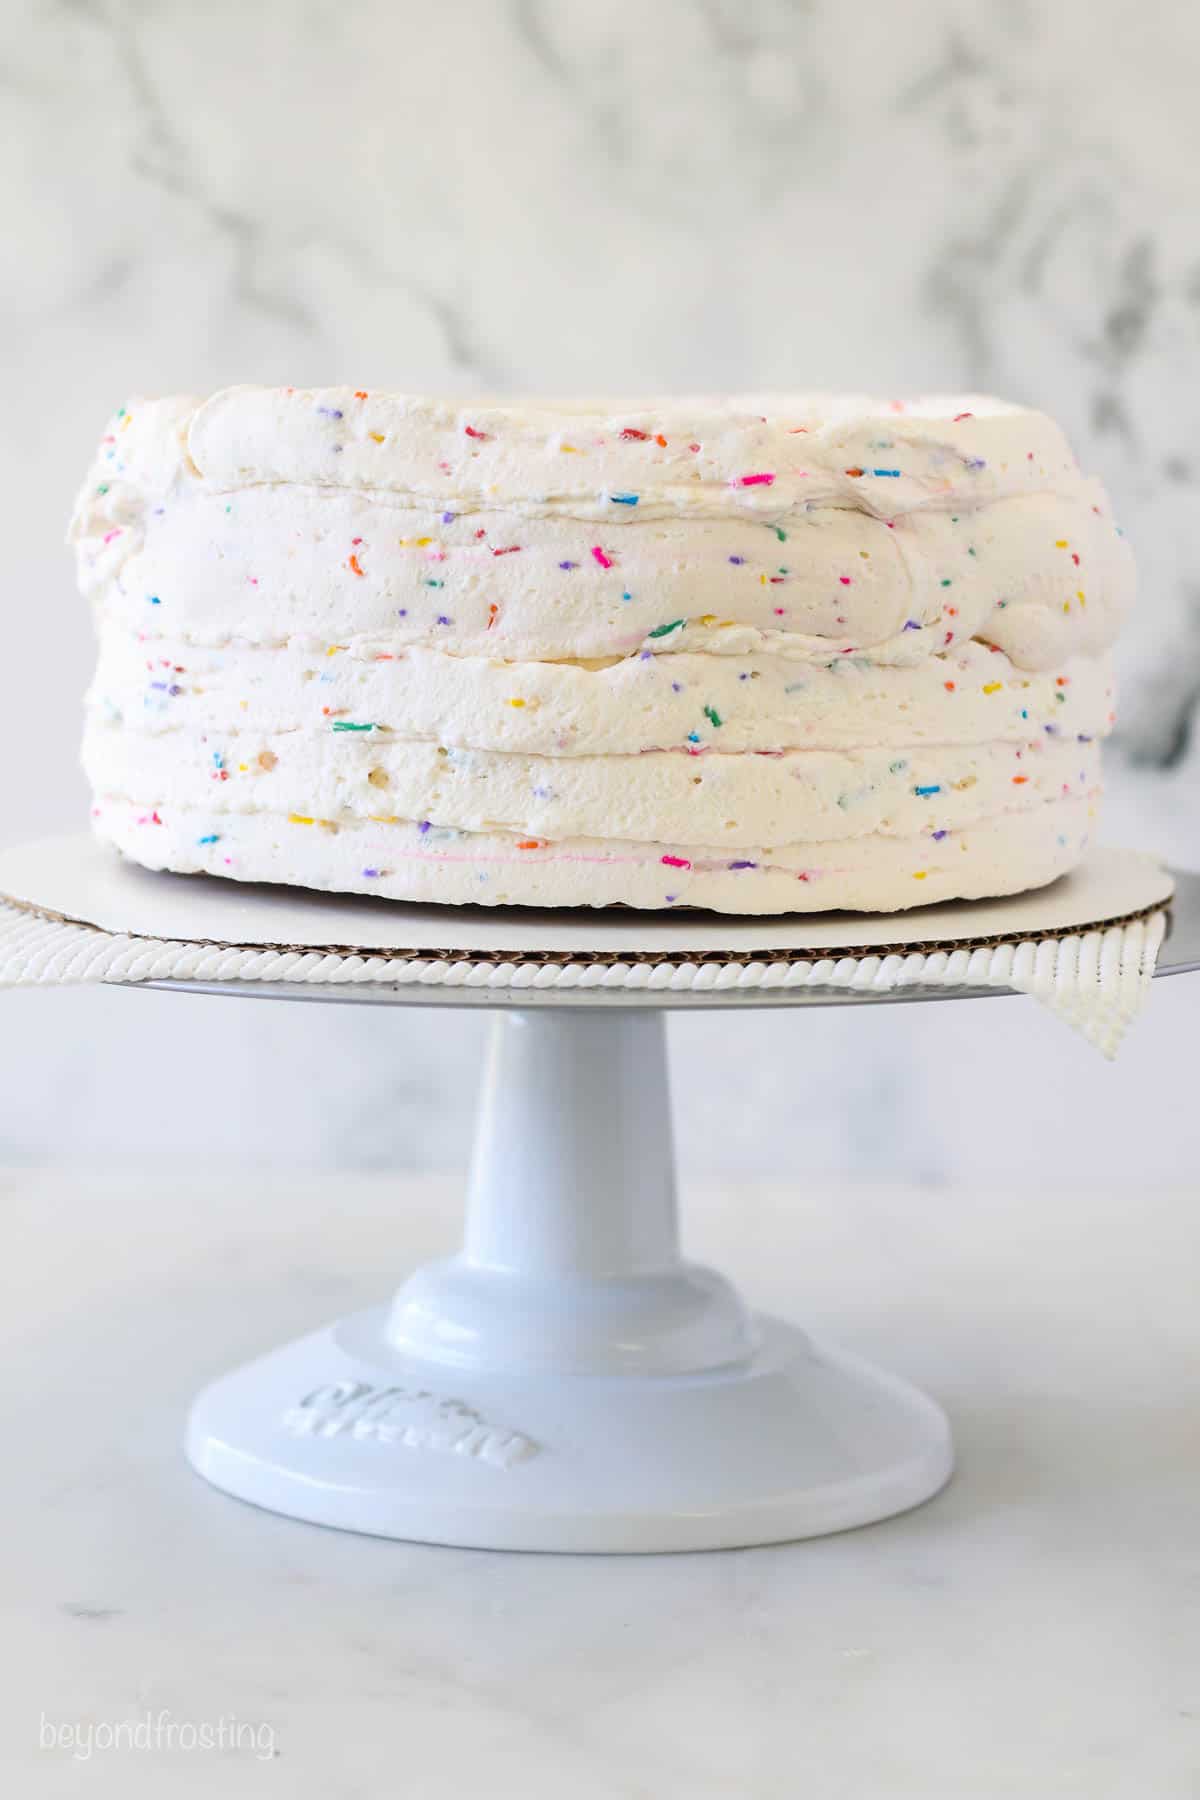 An ice cream cake on a cake board decorated with sprinkle whipped cream